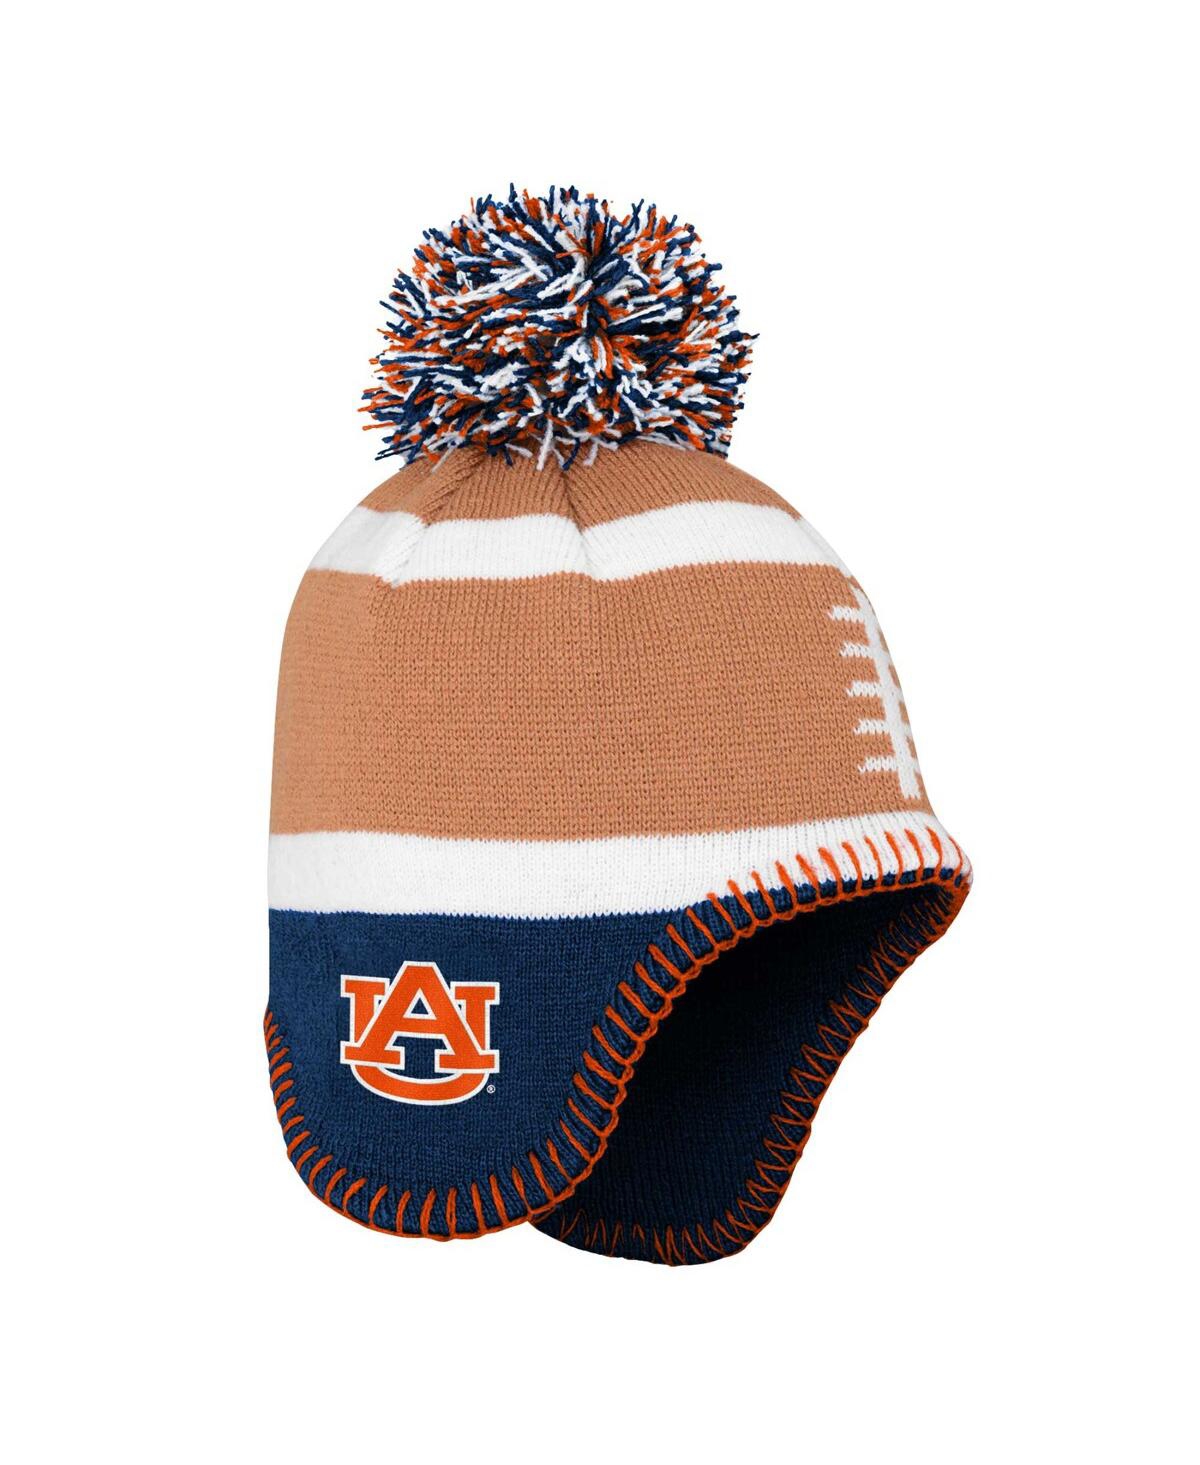 Outerstuff Babies' Little Boys And Girls Brown, Navy Auburn Tigers Football Head Knit Hat With Pom In Brown,navy